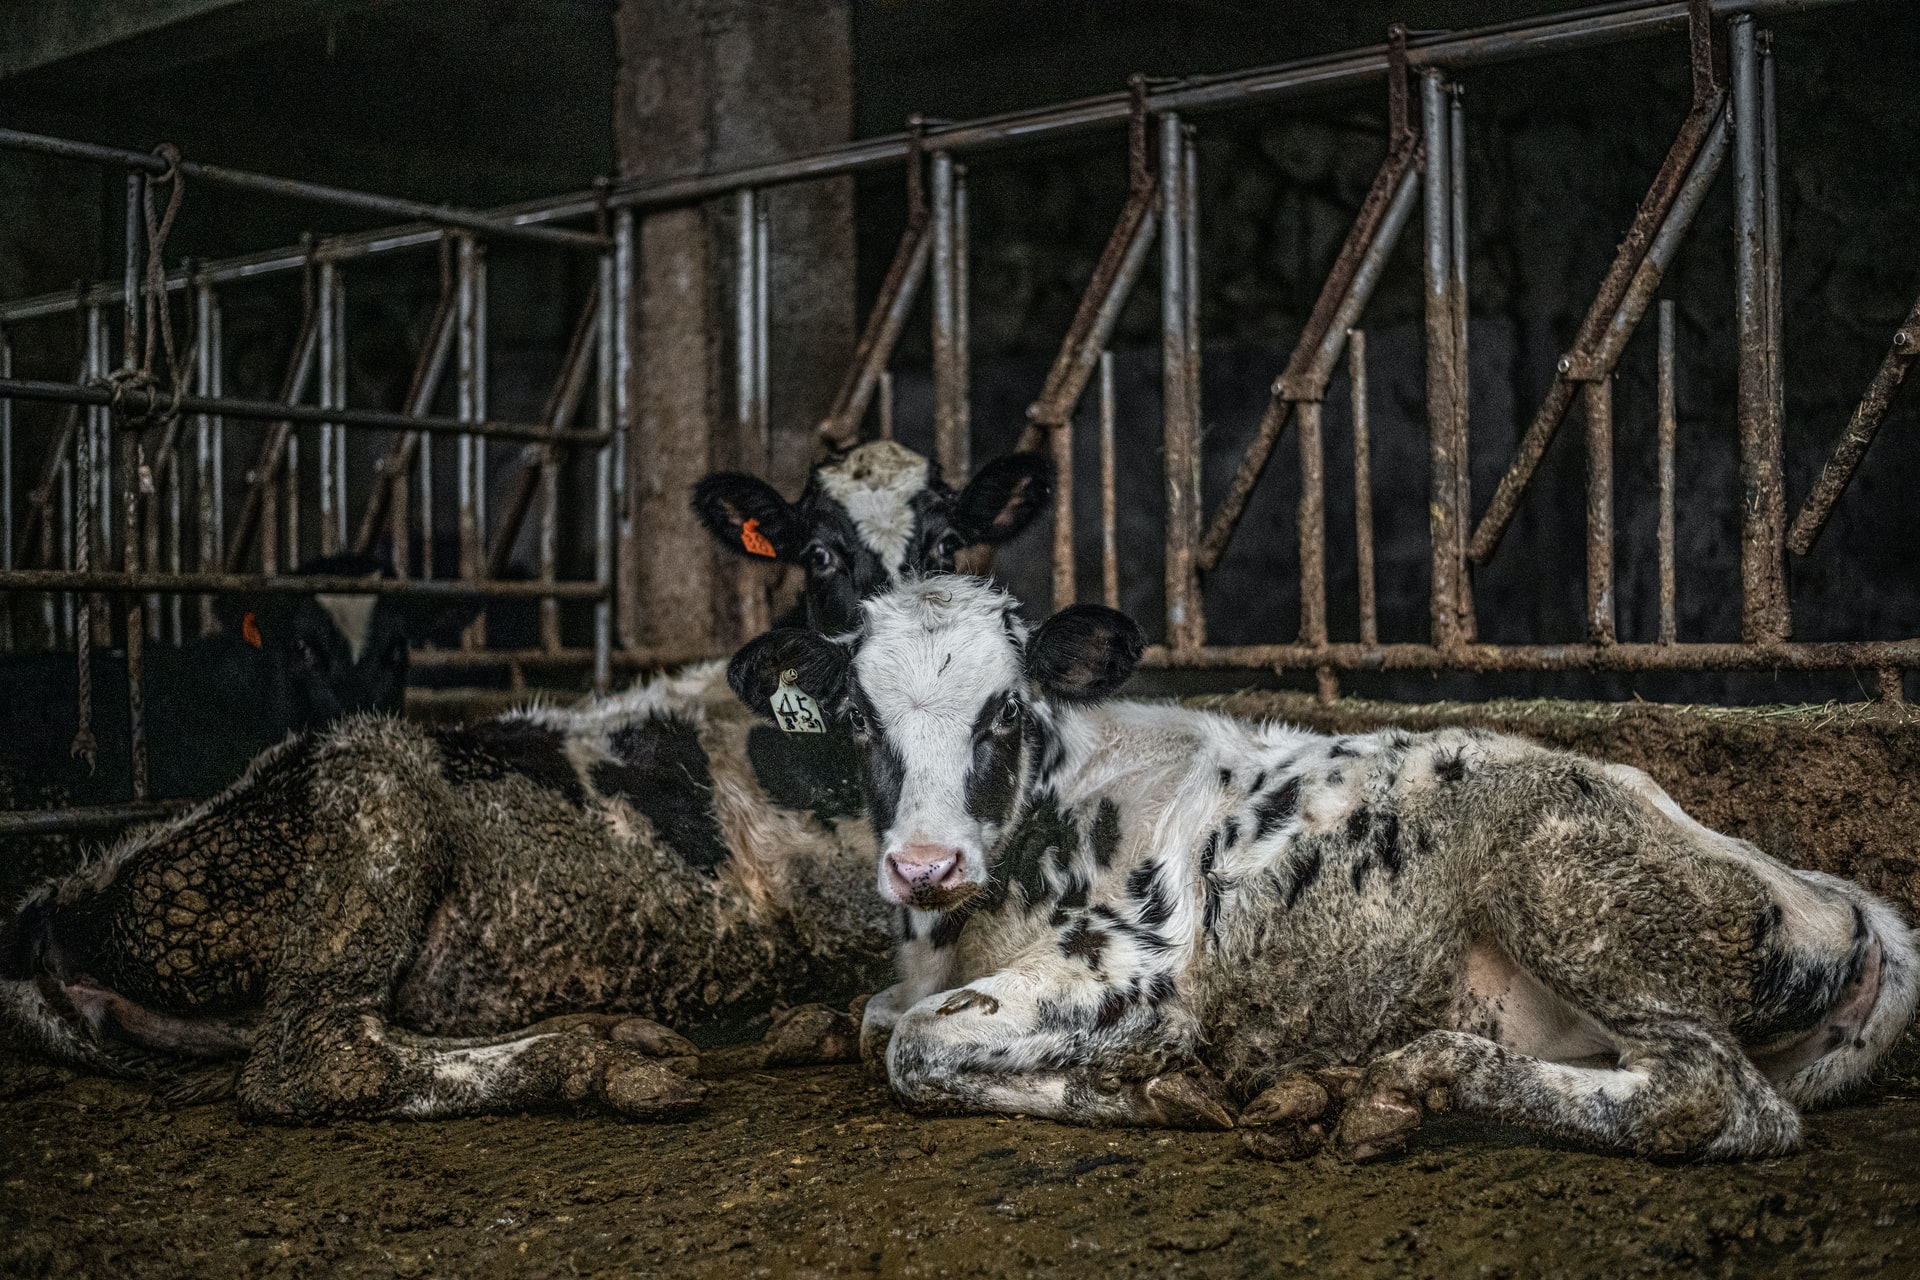 Cows in dirty factory farm conditions